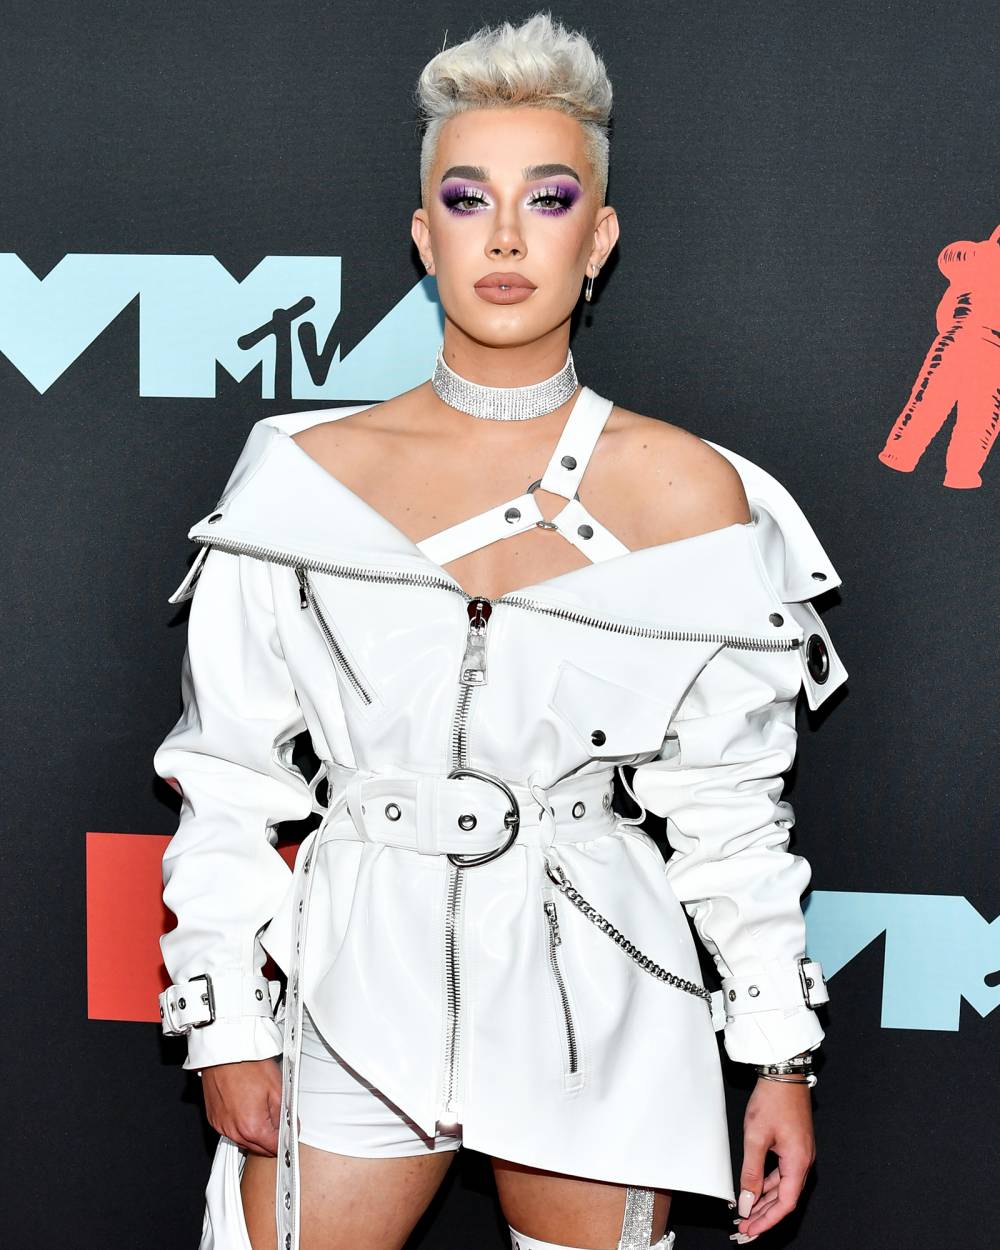 James Charles Speaks Out Amid Grooming Allegations: These Claims Are 'Completely False'